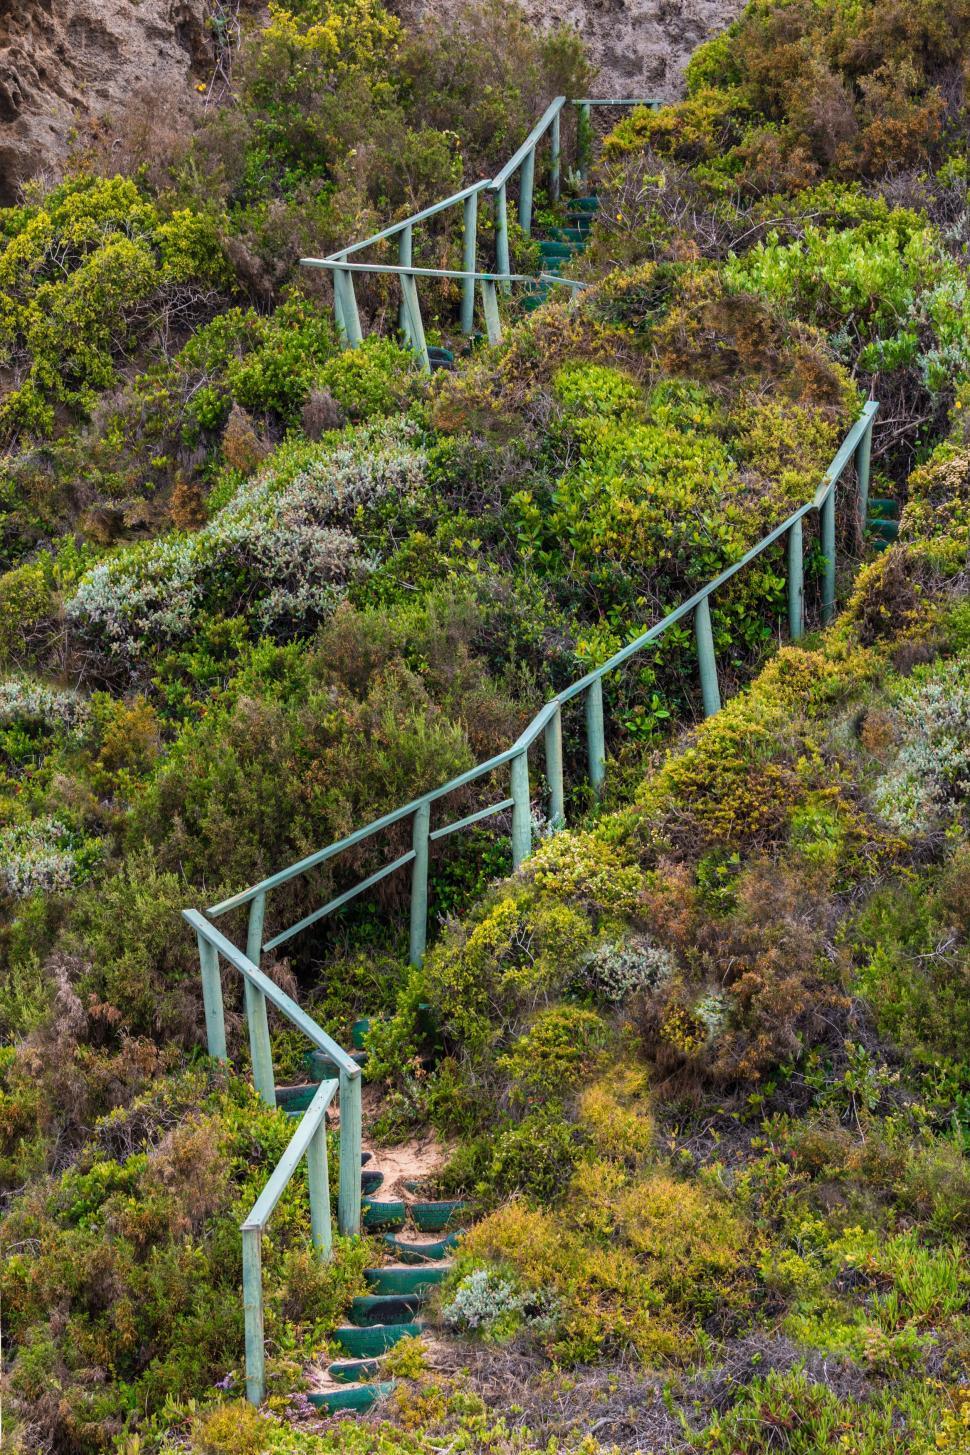 Free Image of stairway handrails steps stairs ambition bush shrubs steep rise upward future success climb achievement exercise difficult landscape inspiration 